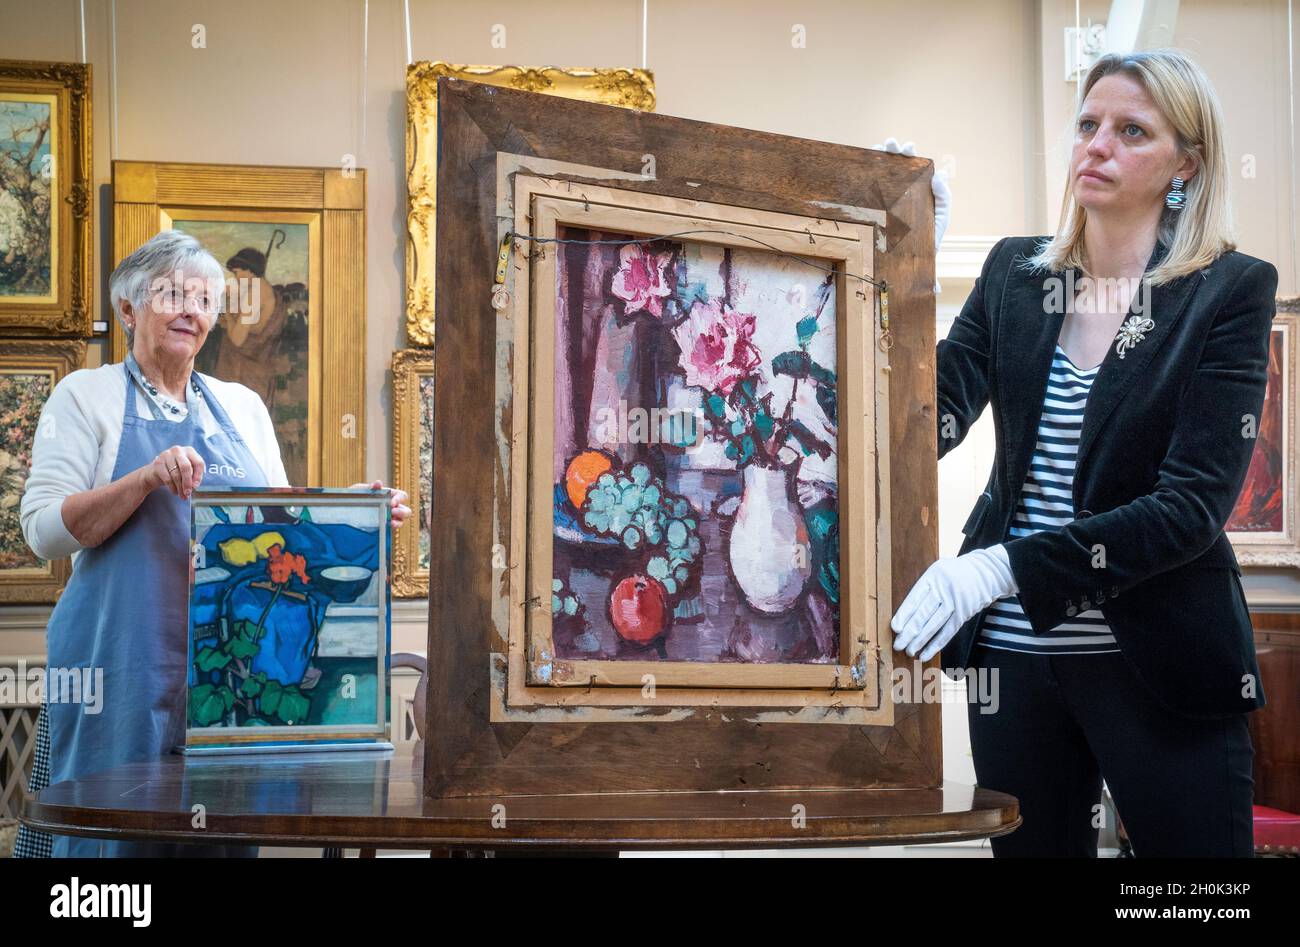 https://c8.alamy.com/comp/2H0K3KP/may-matthews-right-from-bonhams-shows-still-life-with-roses-and-fruit-by-samual-john-peploe-which-is-on-the-reverse-of-the-double-sided-canvas-still-life-with-geranium-c1913-as-seen-reflected-in-a-mirror-held-by-lorna-macgregor-left-during-a-preview-for-the-forthcoming-scottish-sale-at-bonhams-in-edinburgh-items-in-the-sale-which-also-include-works-by-other-scottish-artists-jack-vettriano-and-james-paterson-are-being-sold-in-aid-of-charities-amnesty-international-and-medecins-sans-frontieres-picture-date-wednesday-october-13-2021-2H0K3KP.jpg